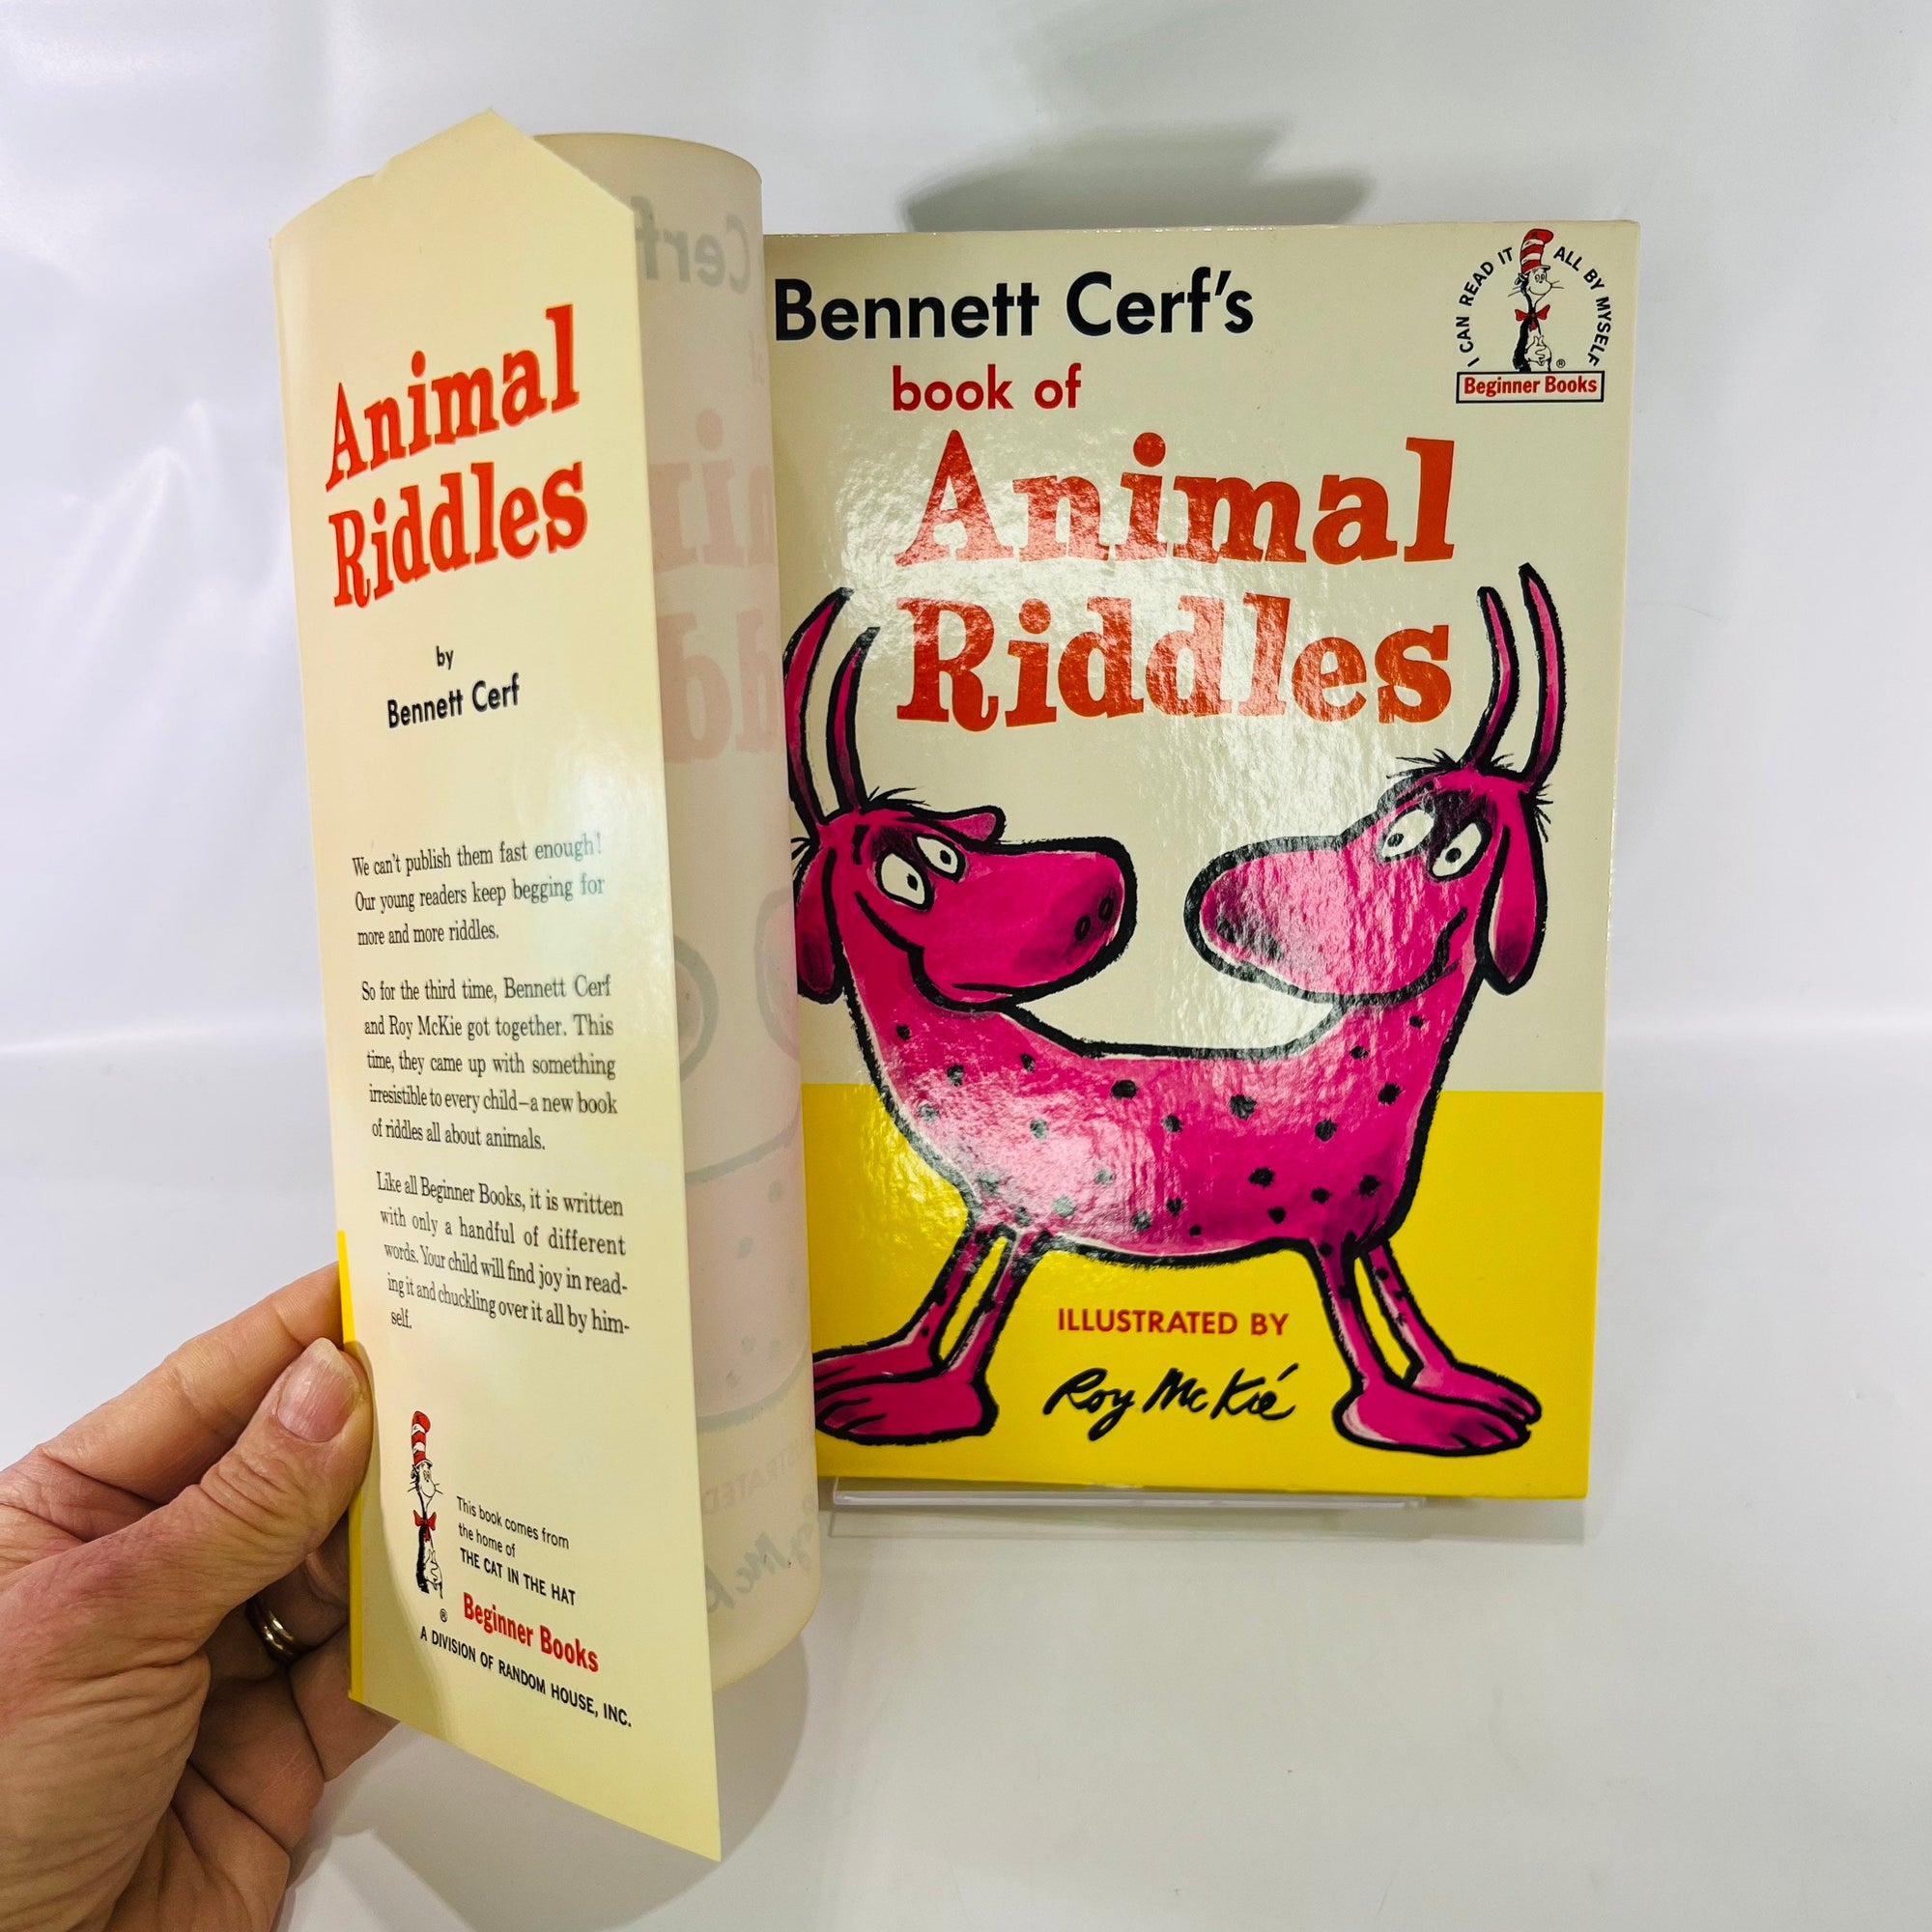 Bennett Cerf's book of Animal Riddles illustrated by Roy McKie 1964 I Can Read It Beginner Books Vintage Colorful Joke Book